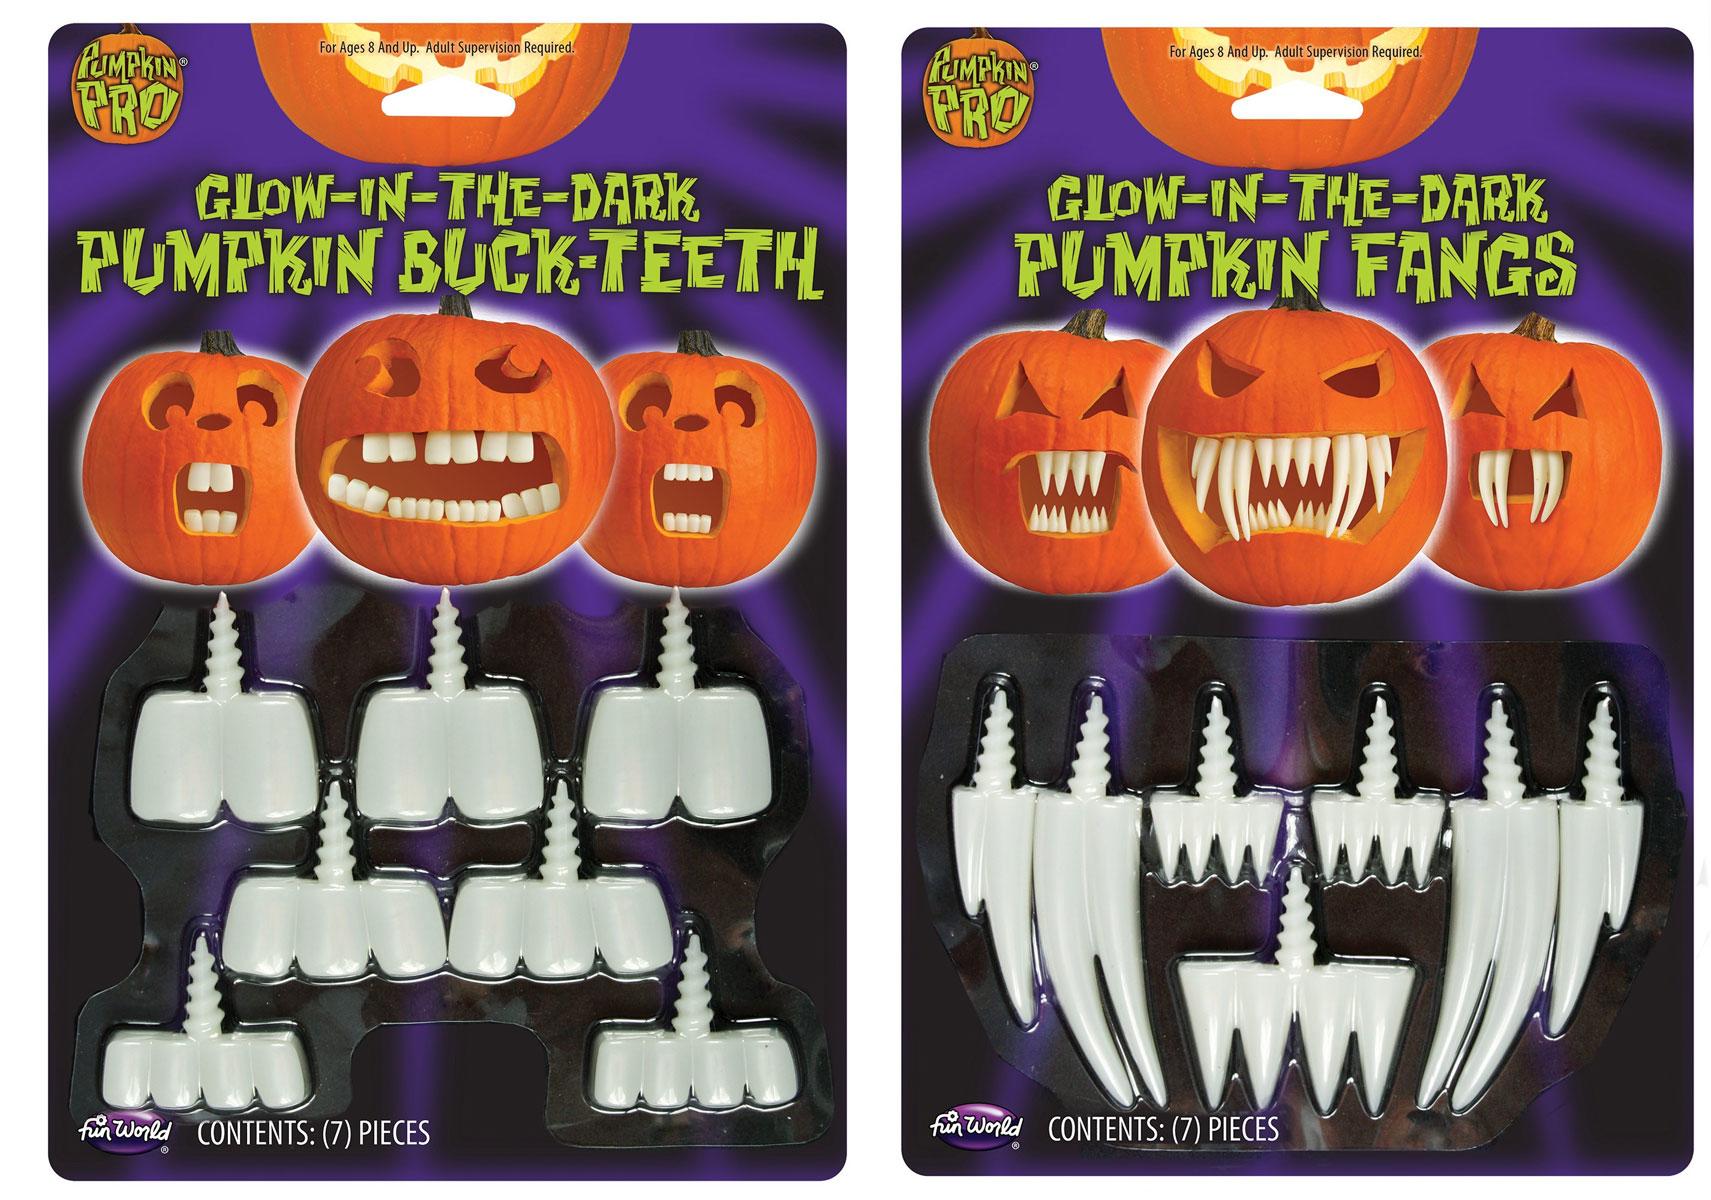 Glow-In-The-Dark Pumpkin Teeth and Fangs by Fun World 94684 available here at Karnival Costumes online Halloween party shop